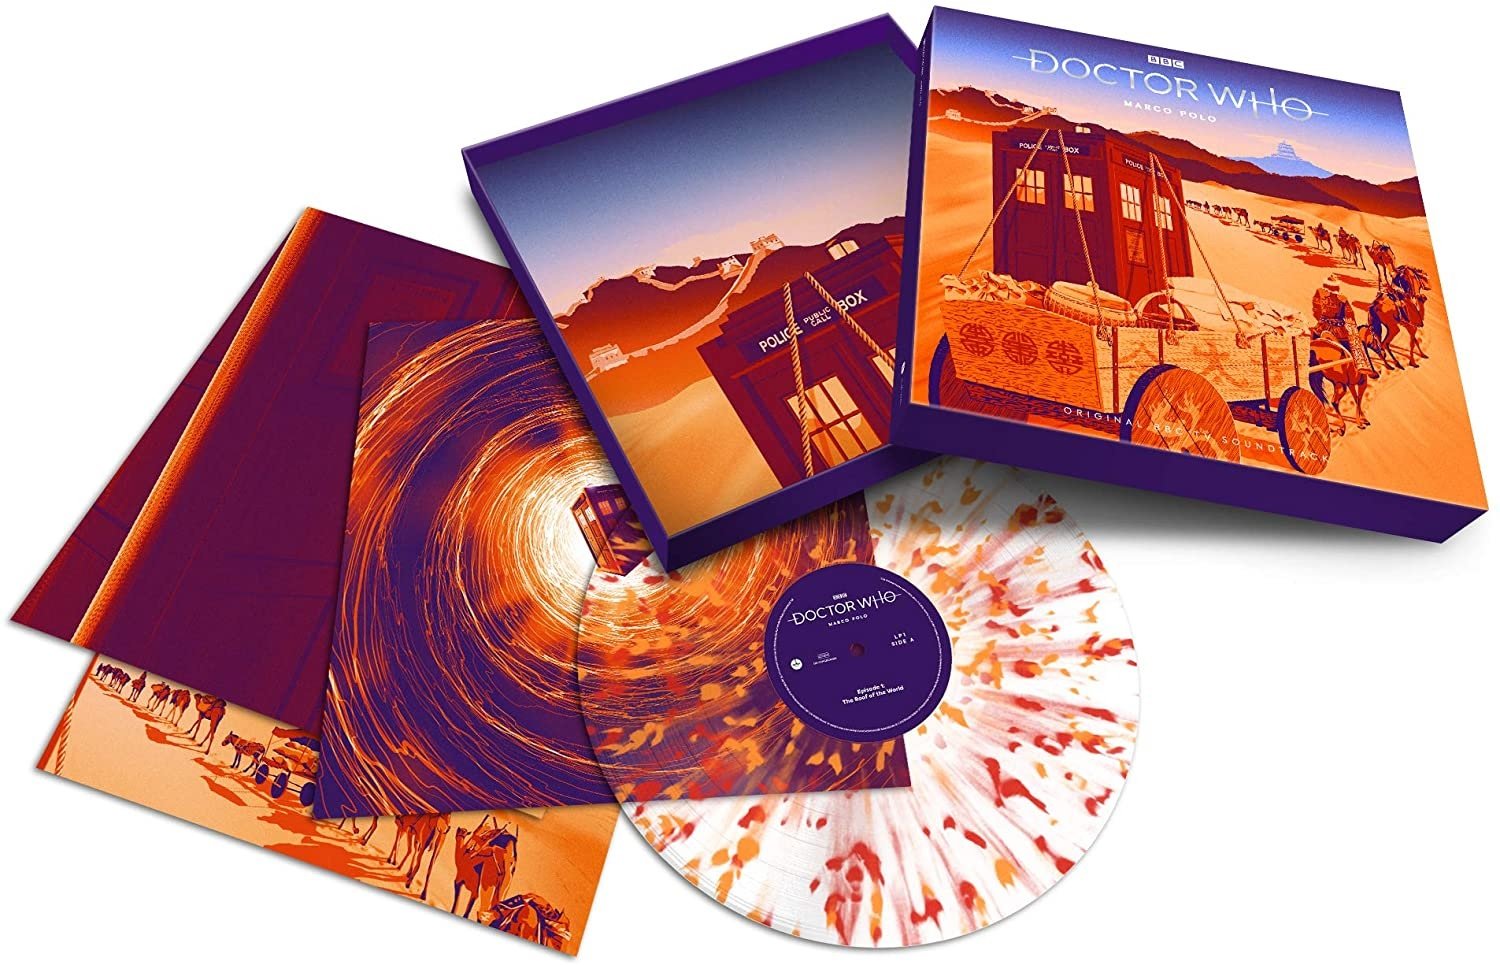 Coming Soon: First Doctor Historical, Marco Polo is the Latest “Vinyl Who” Release